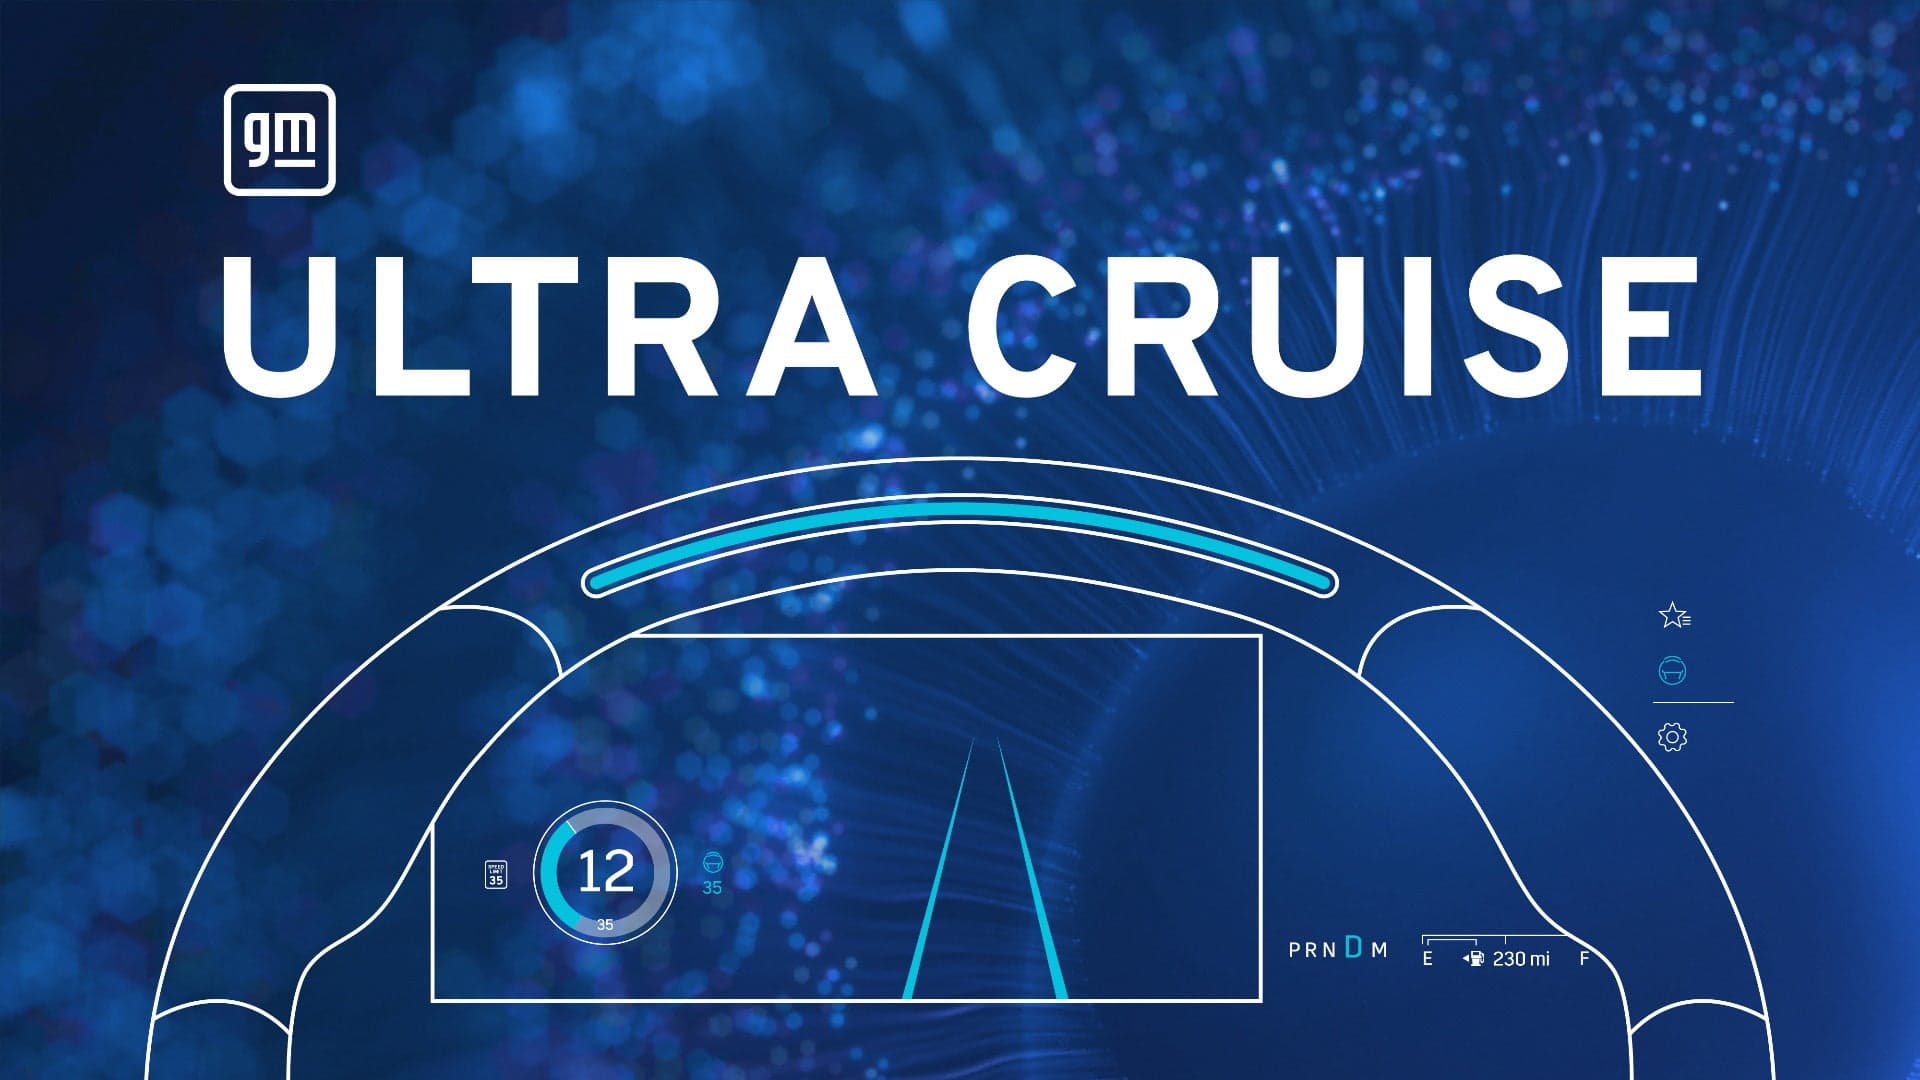 GM’s Ultra Cruise Brings Hands-Free Driving to Residential Roads